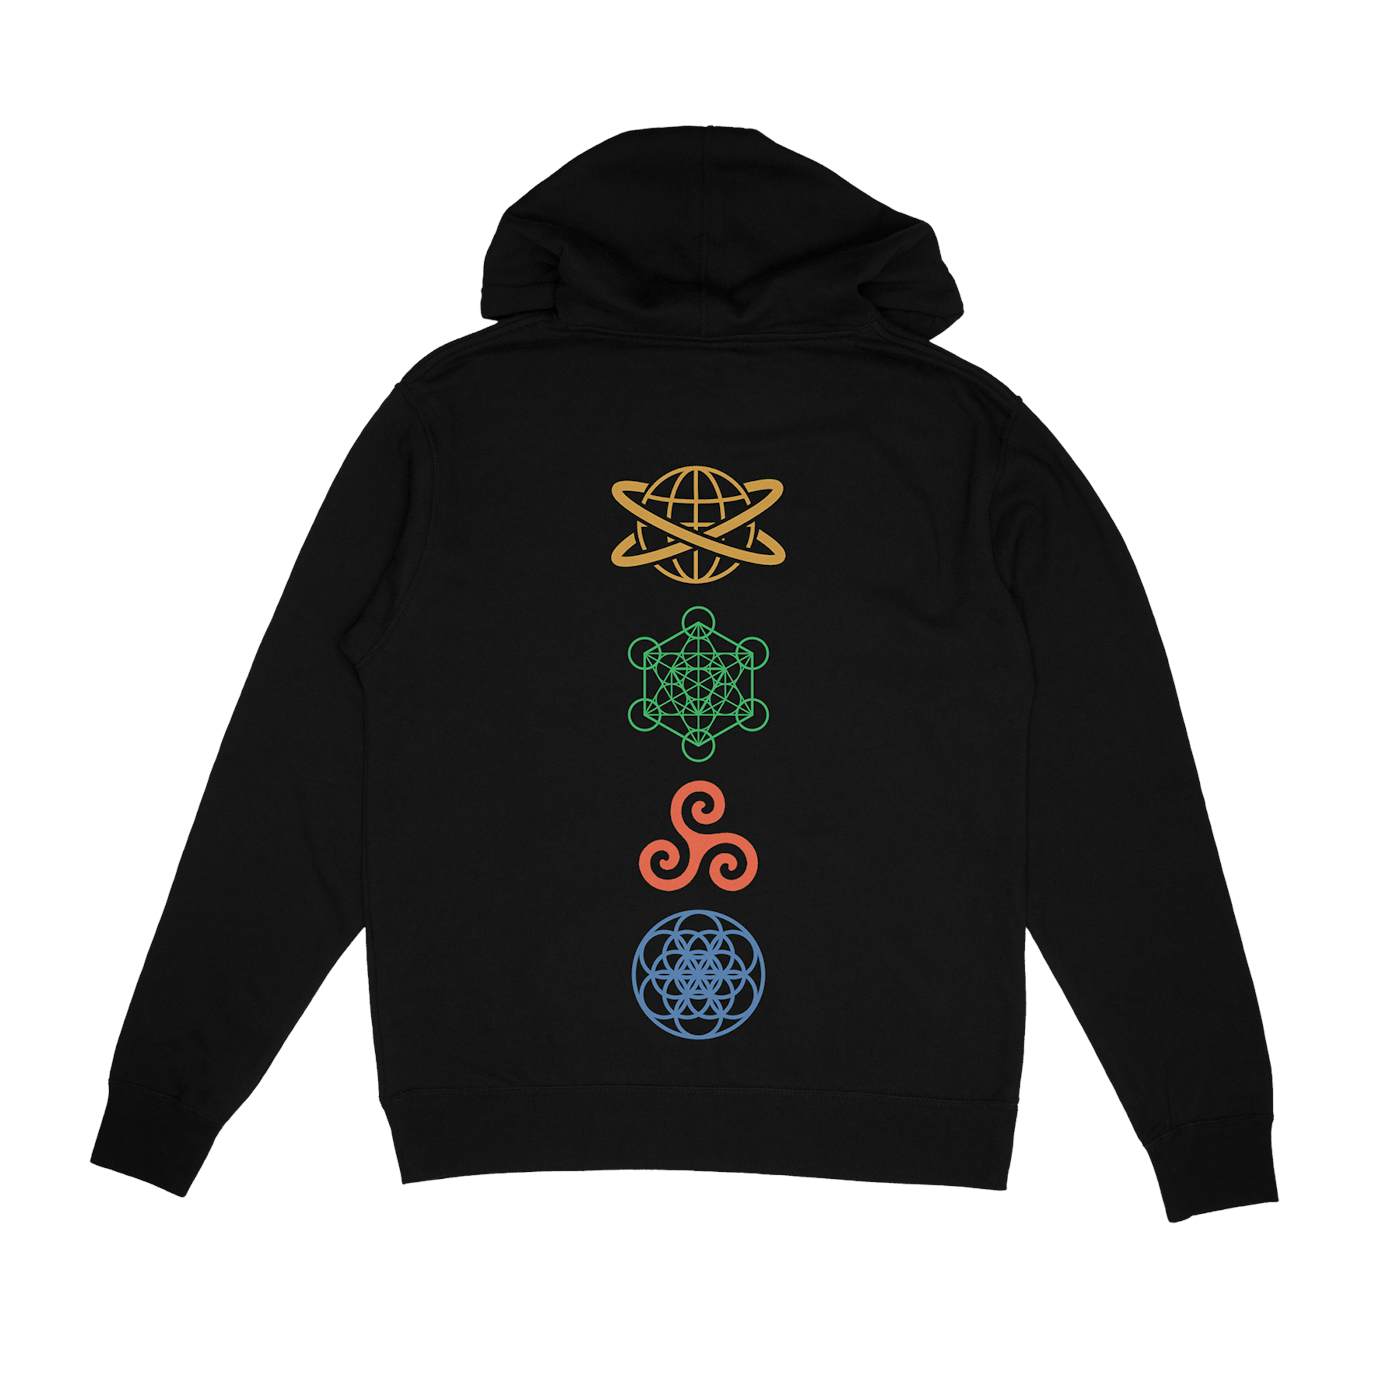 Gryffin Melodic Music Hoodie